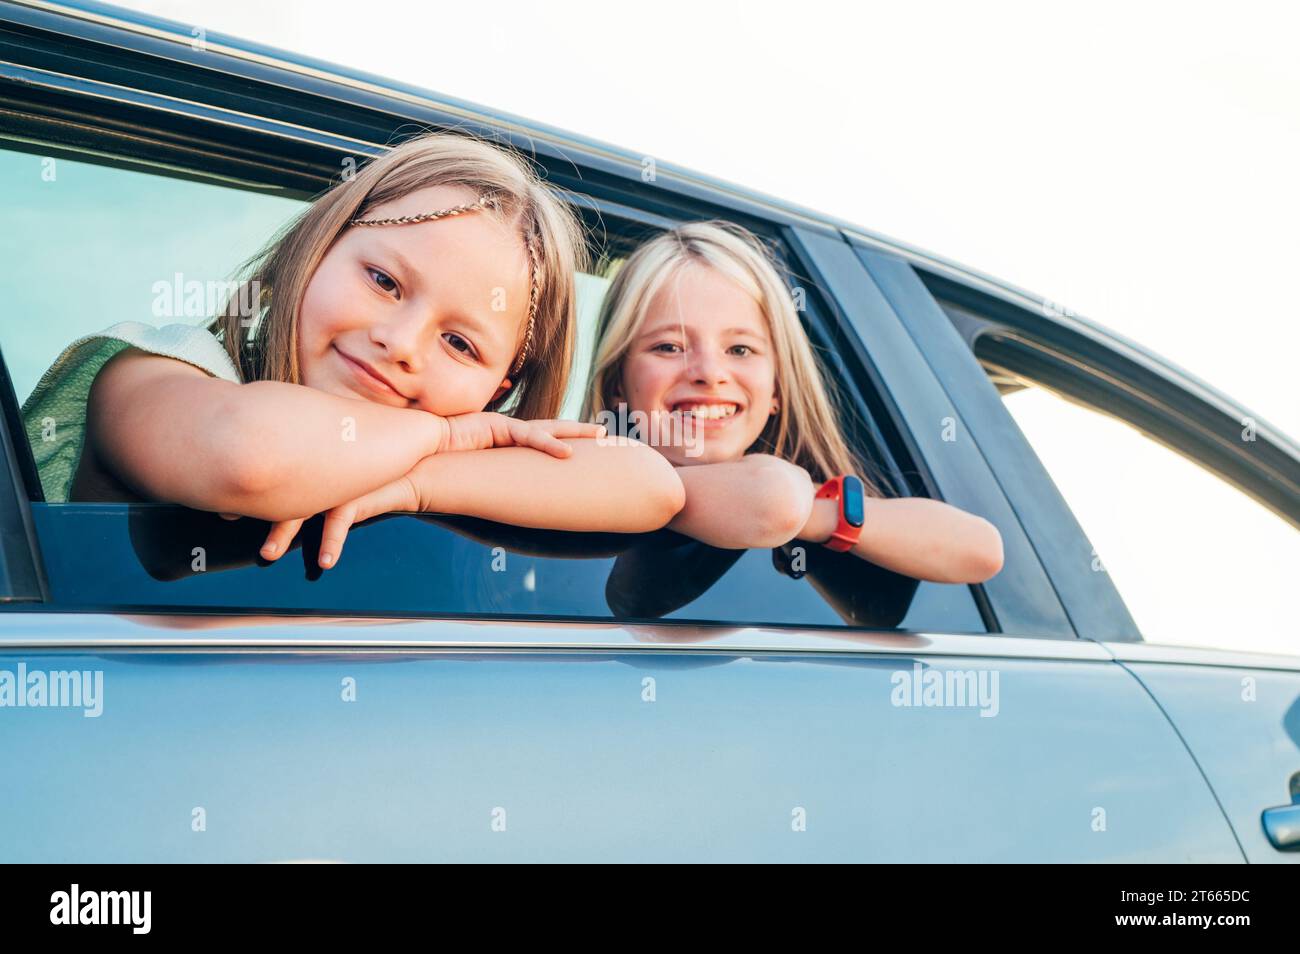 Two happy sisters looking out open car window during auto trip. Cute girls are smiling, laughing during road jorney. Family values, traveling concept Stock Photo